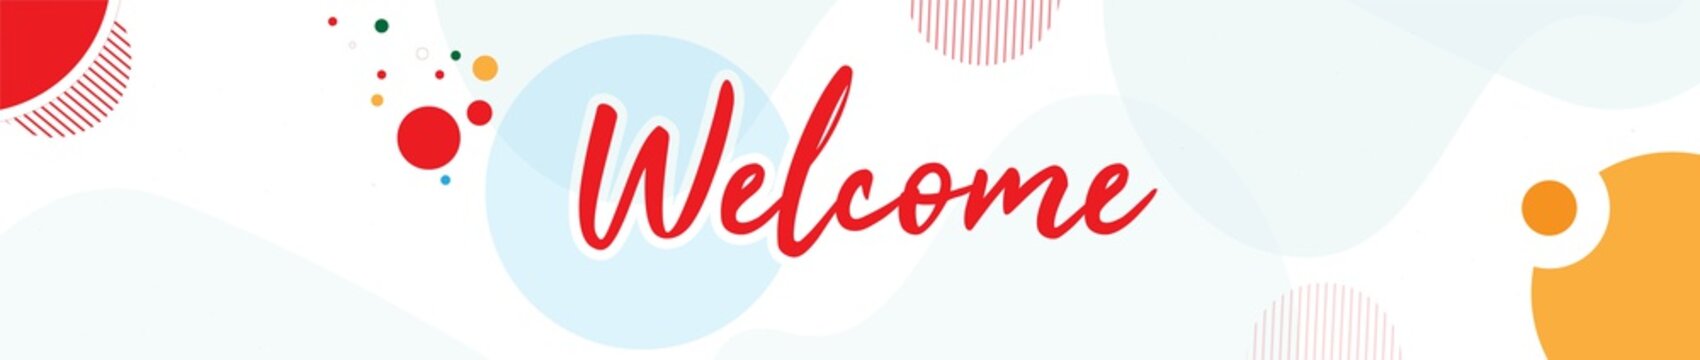 Welcome web banner